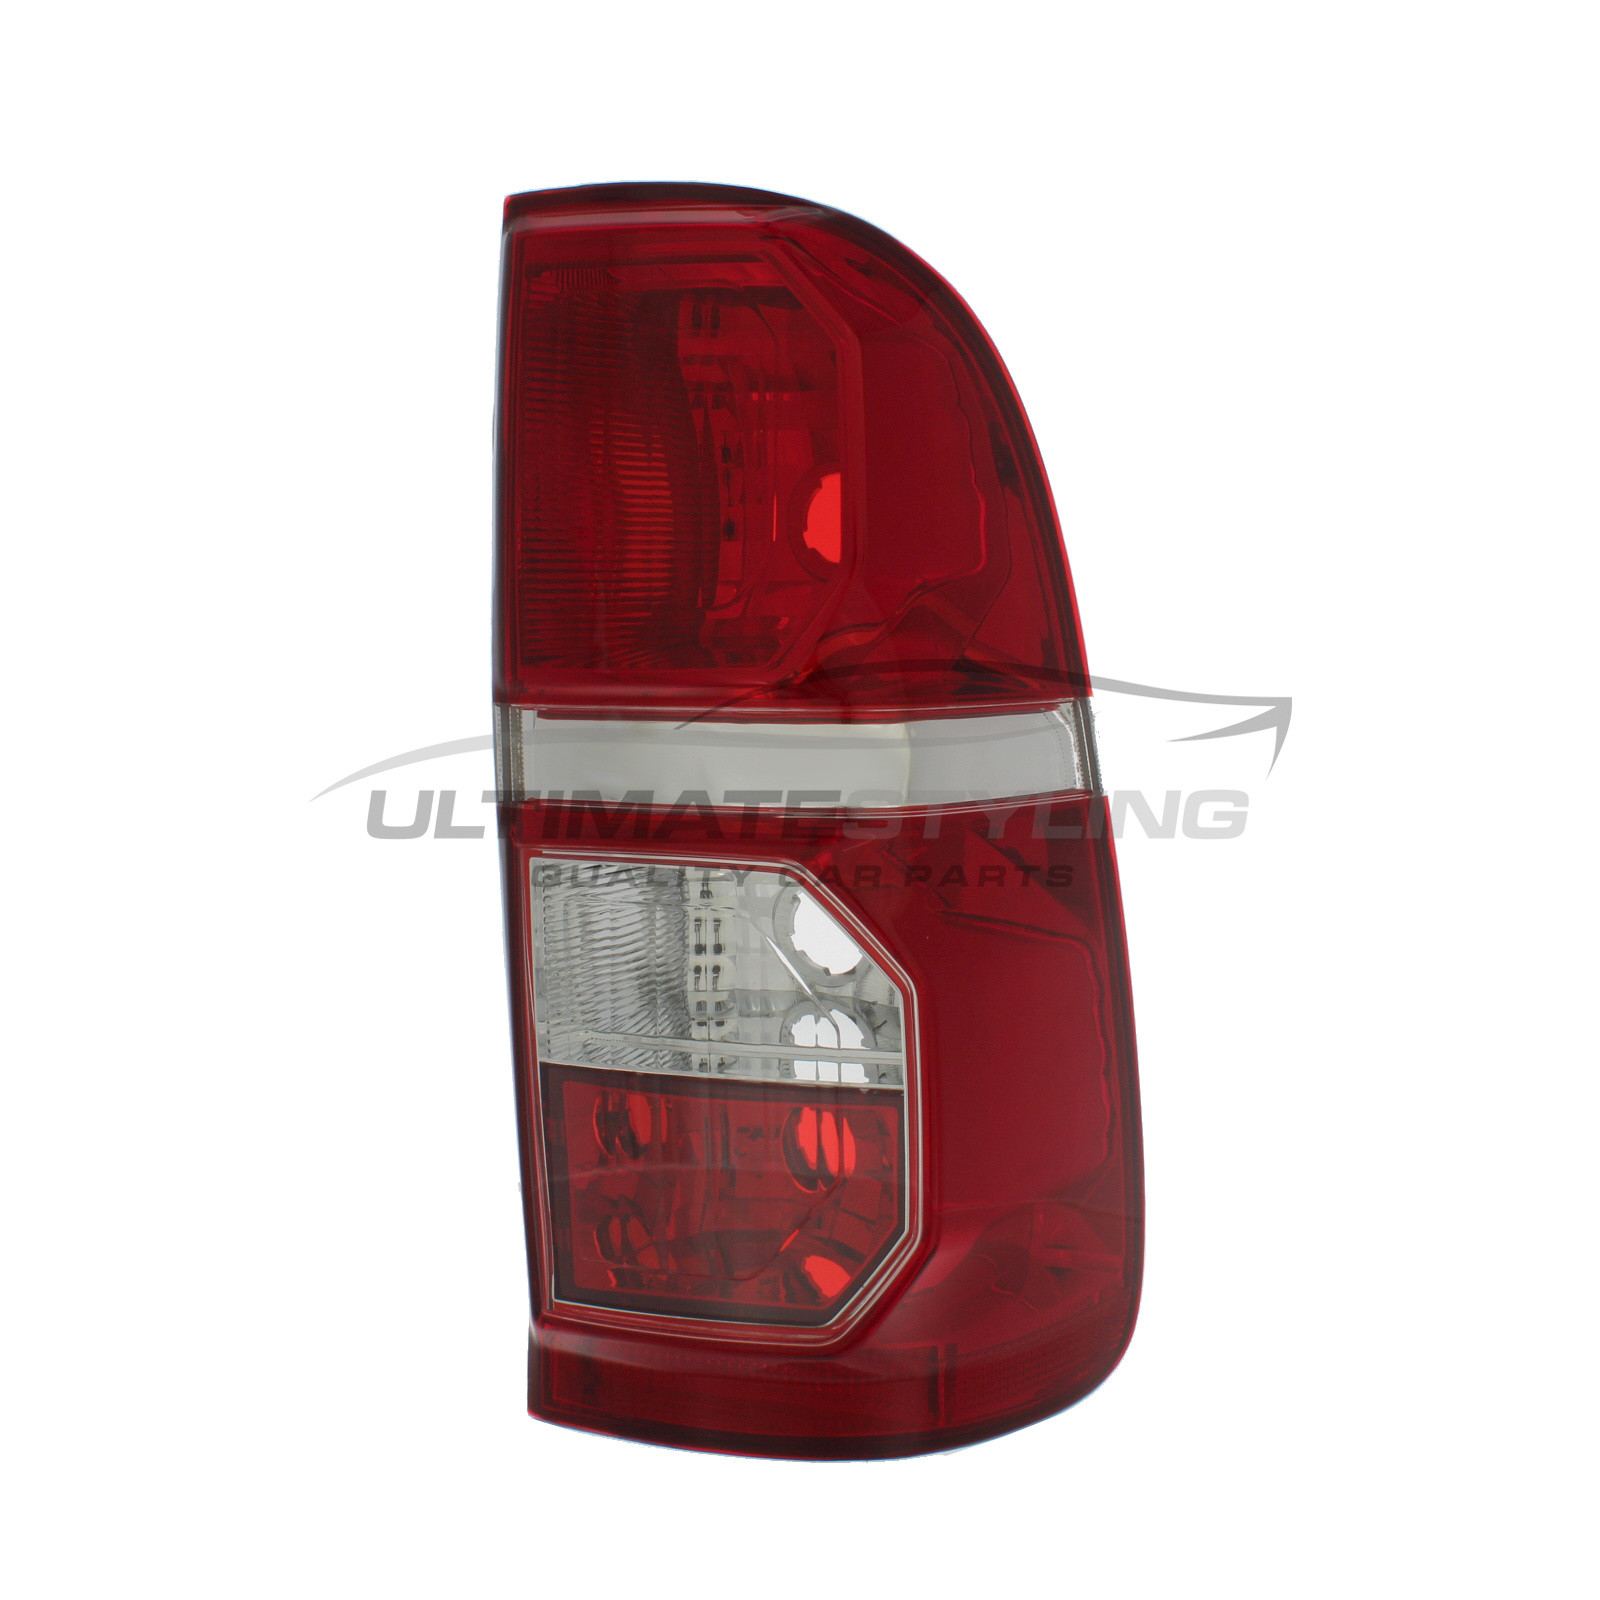 Toyota Hi-Lux 2011-2017 Non-LED Rear Light / Tail Light Excluding Bulb Holder Drivers Side (RH)